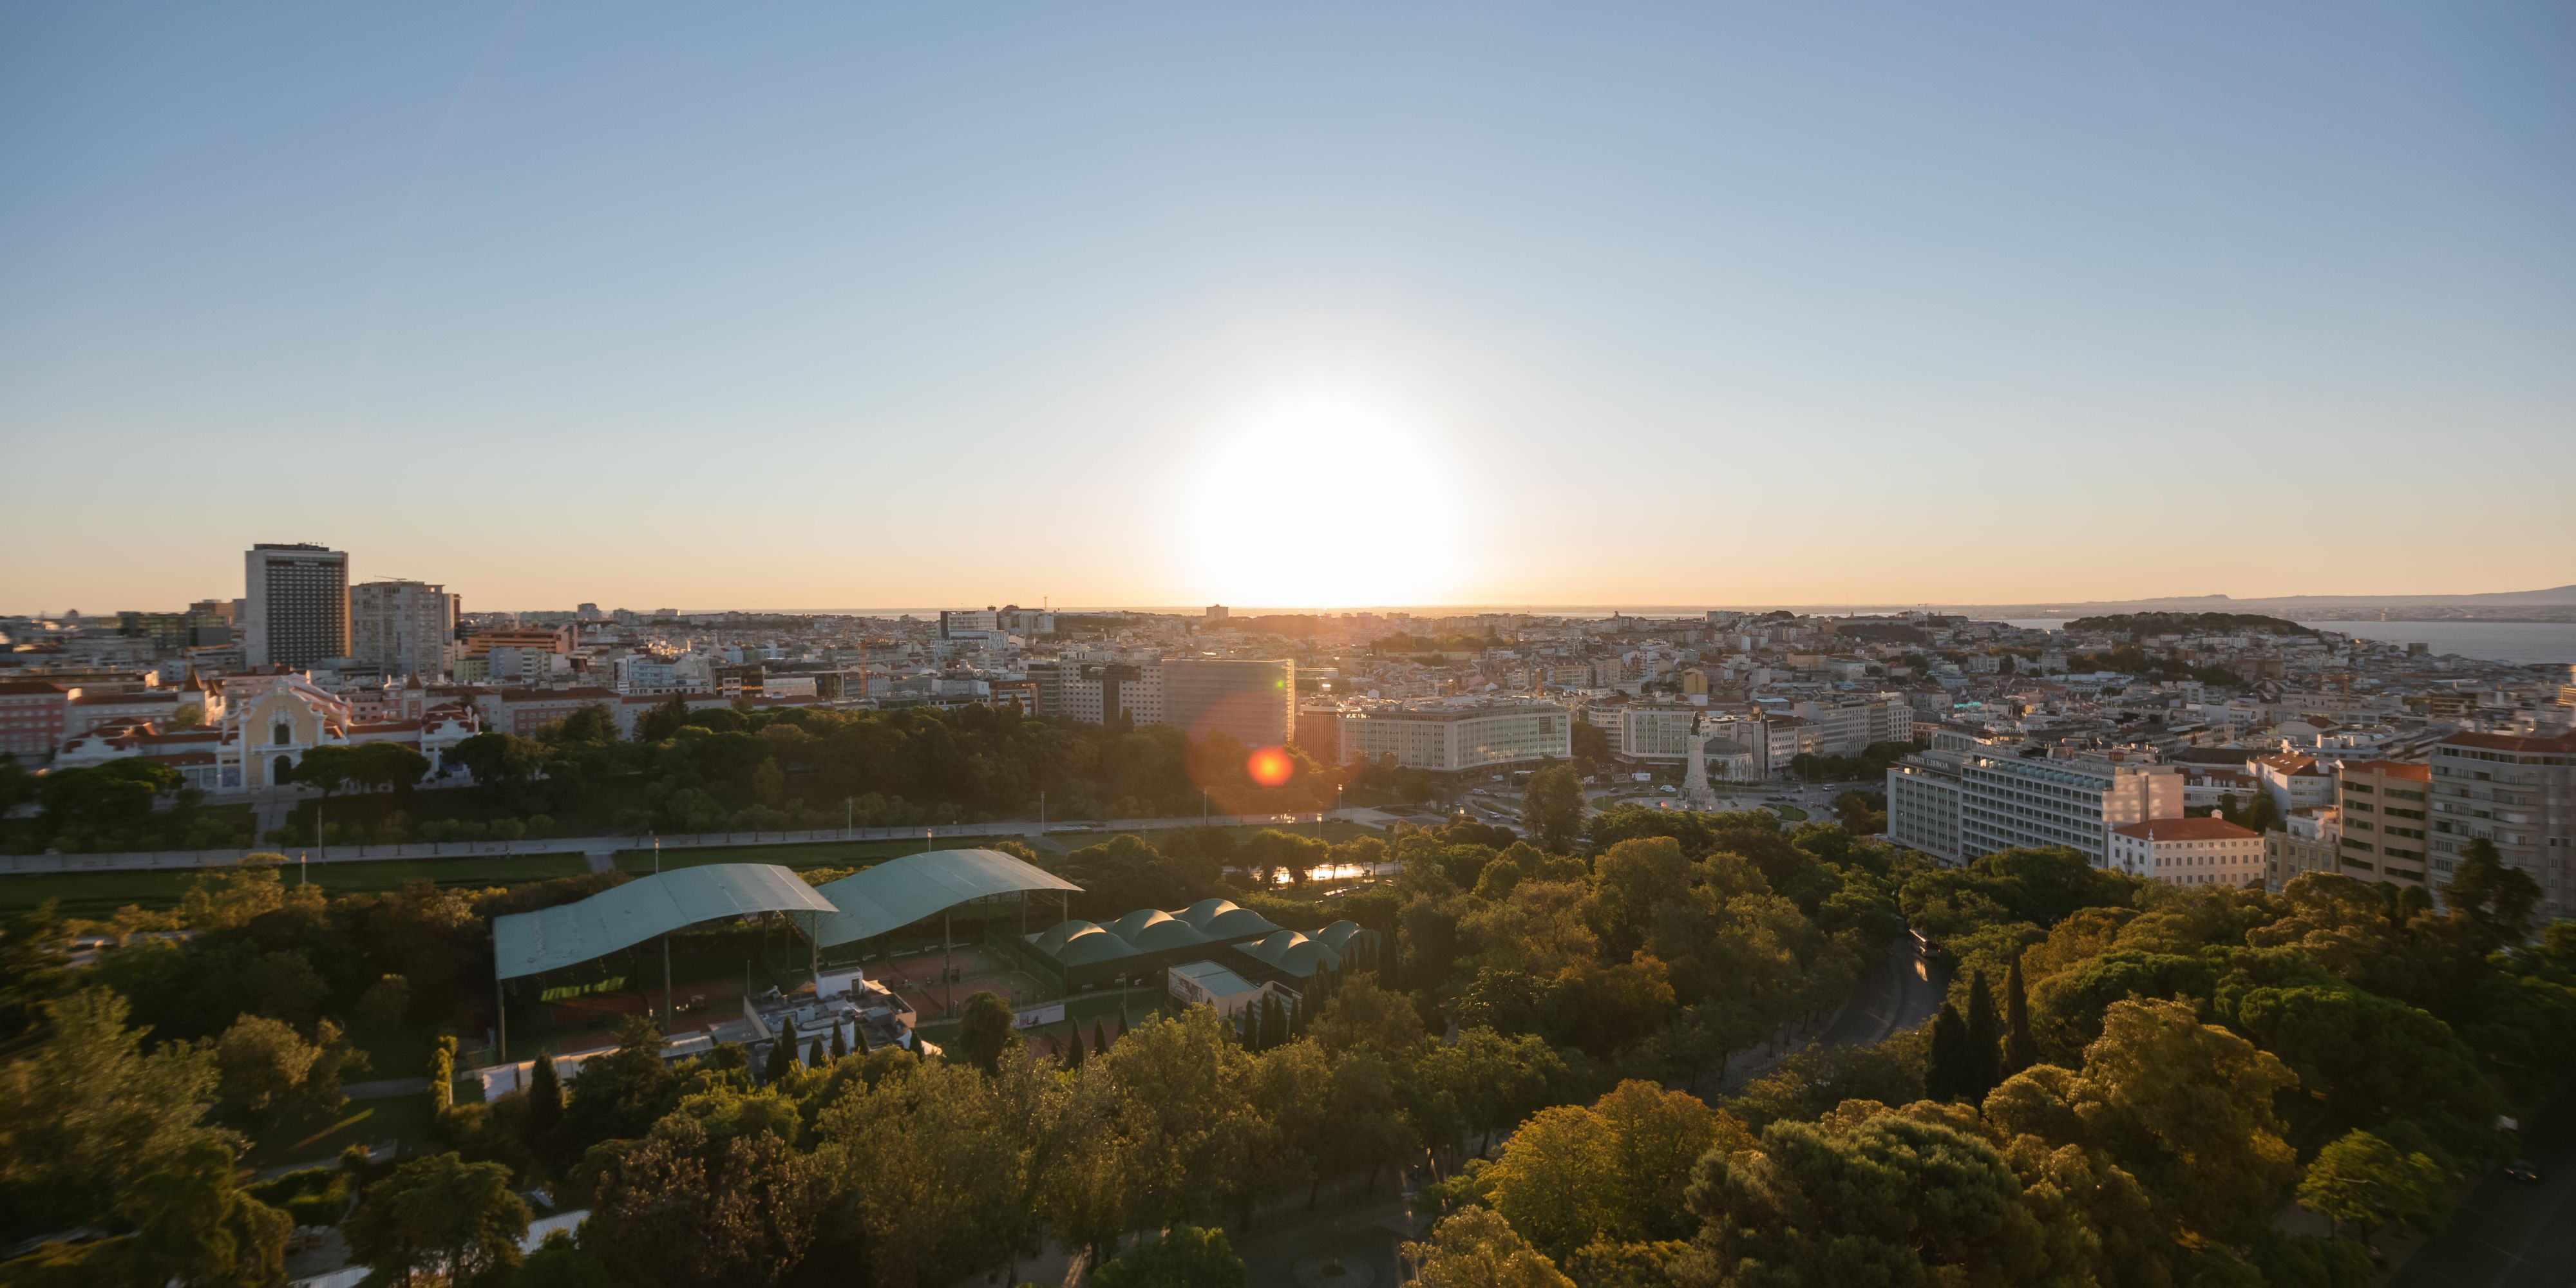 Just a short walk from Eduardo VII, the largest park in central Lisbon, and Avenida da Liberdade Boulevard set the scene for your stay at the InterContinental Lisbon. Enjoy views of the park and Lisbon's historic old town from our guest rooms and suites.